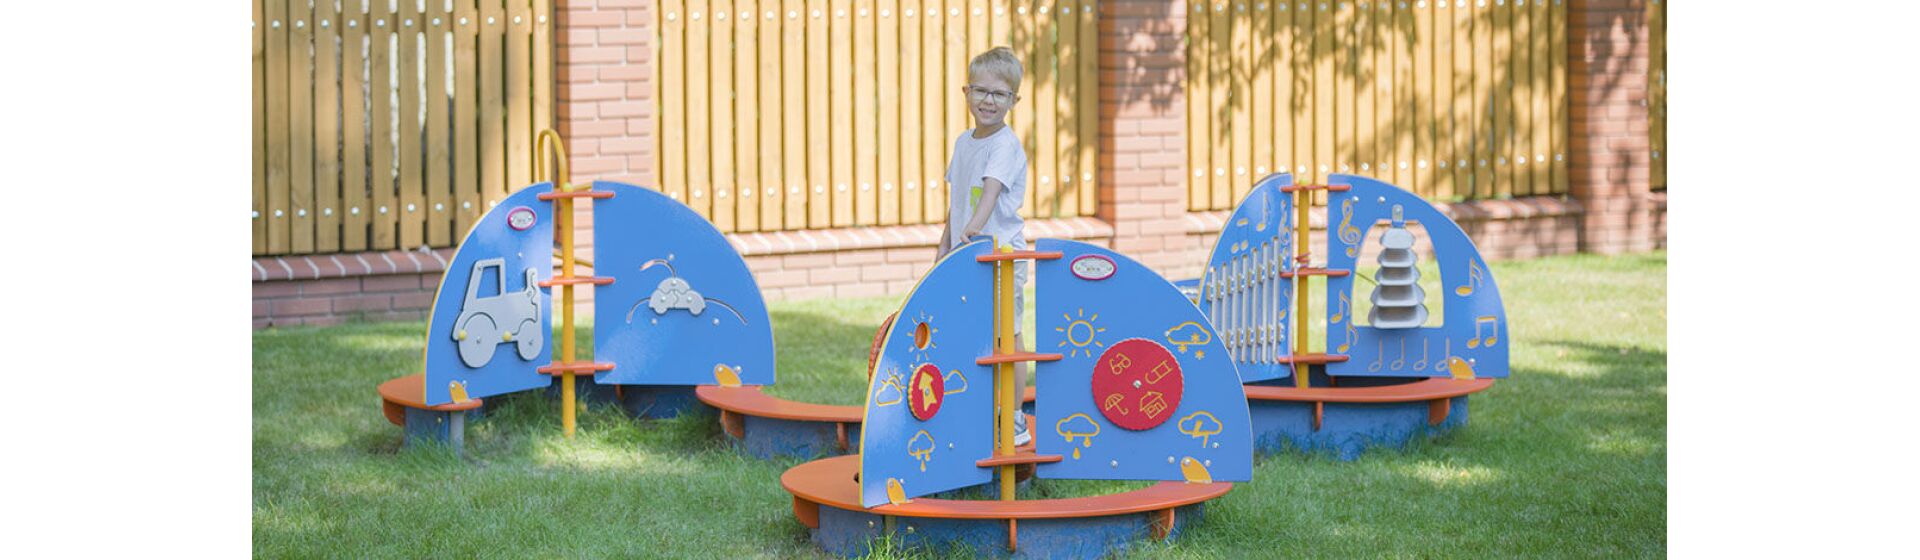 Manipulation Islands - unique devices designed for the youngest users of playgrounds